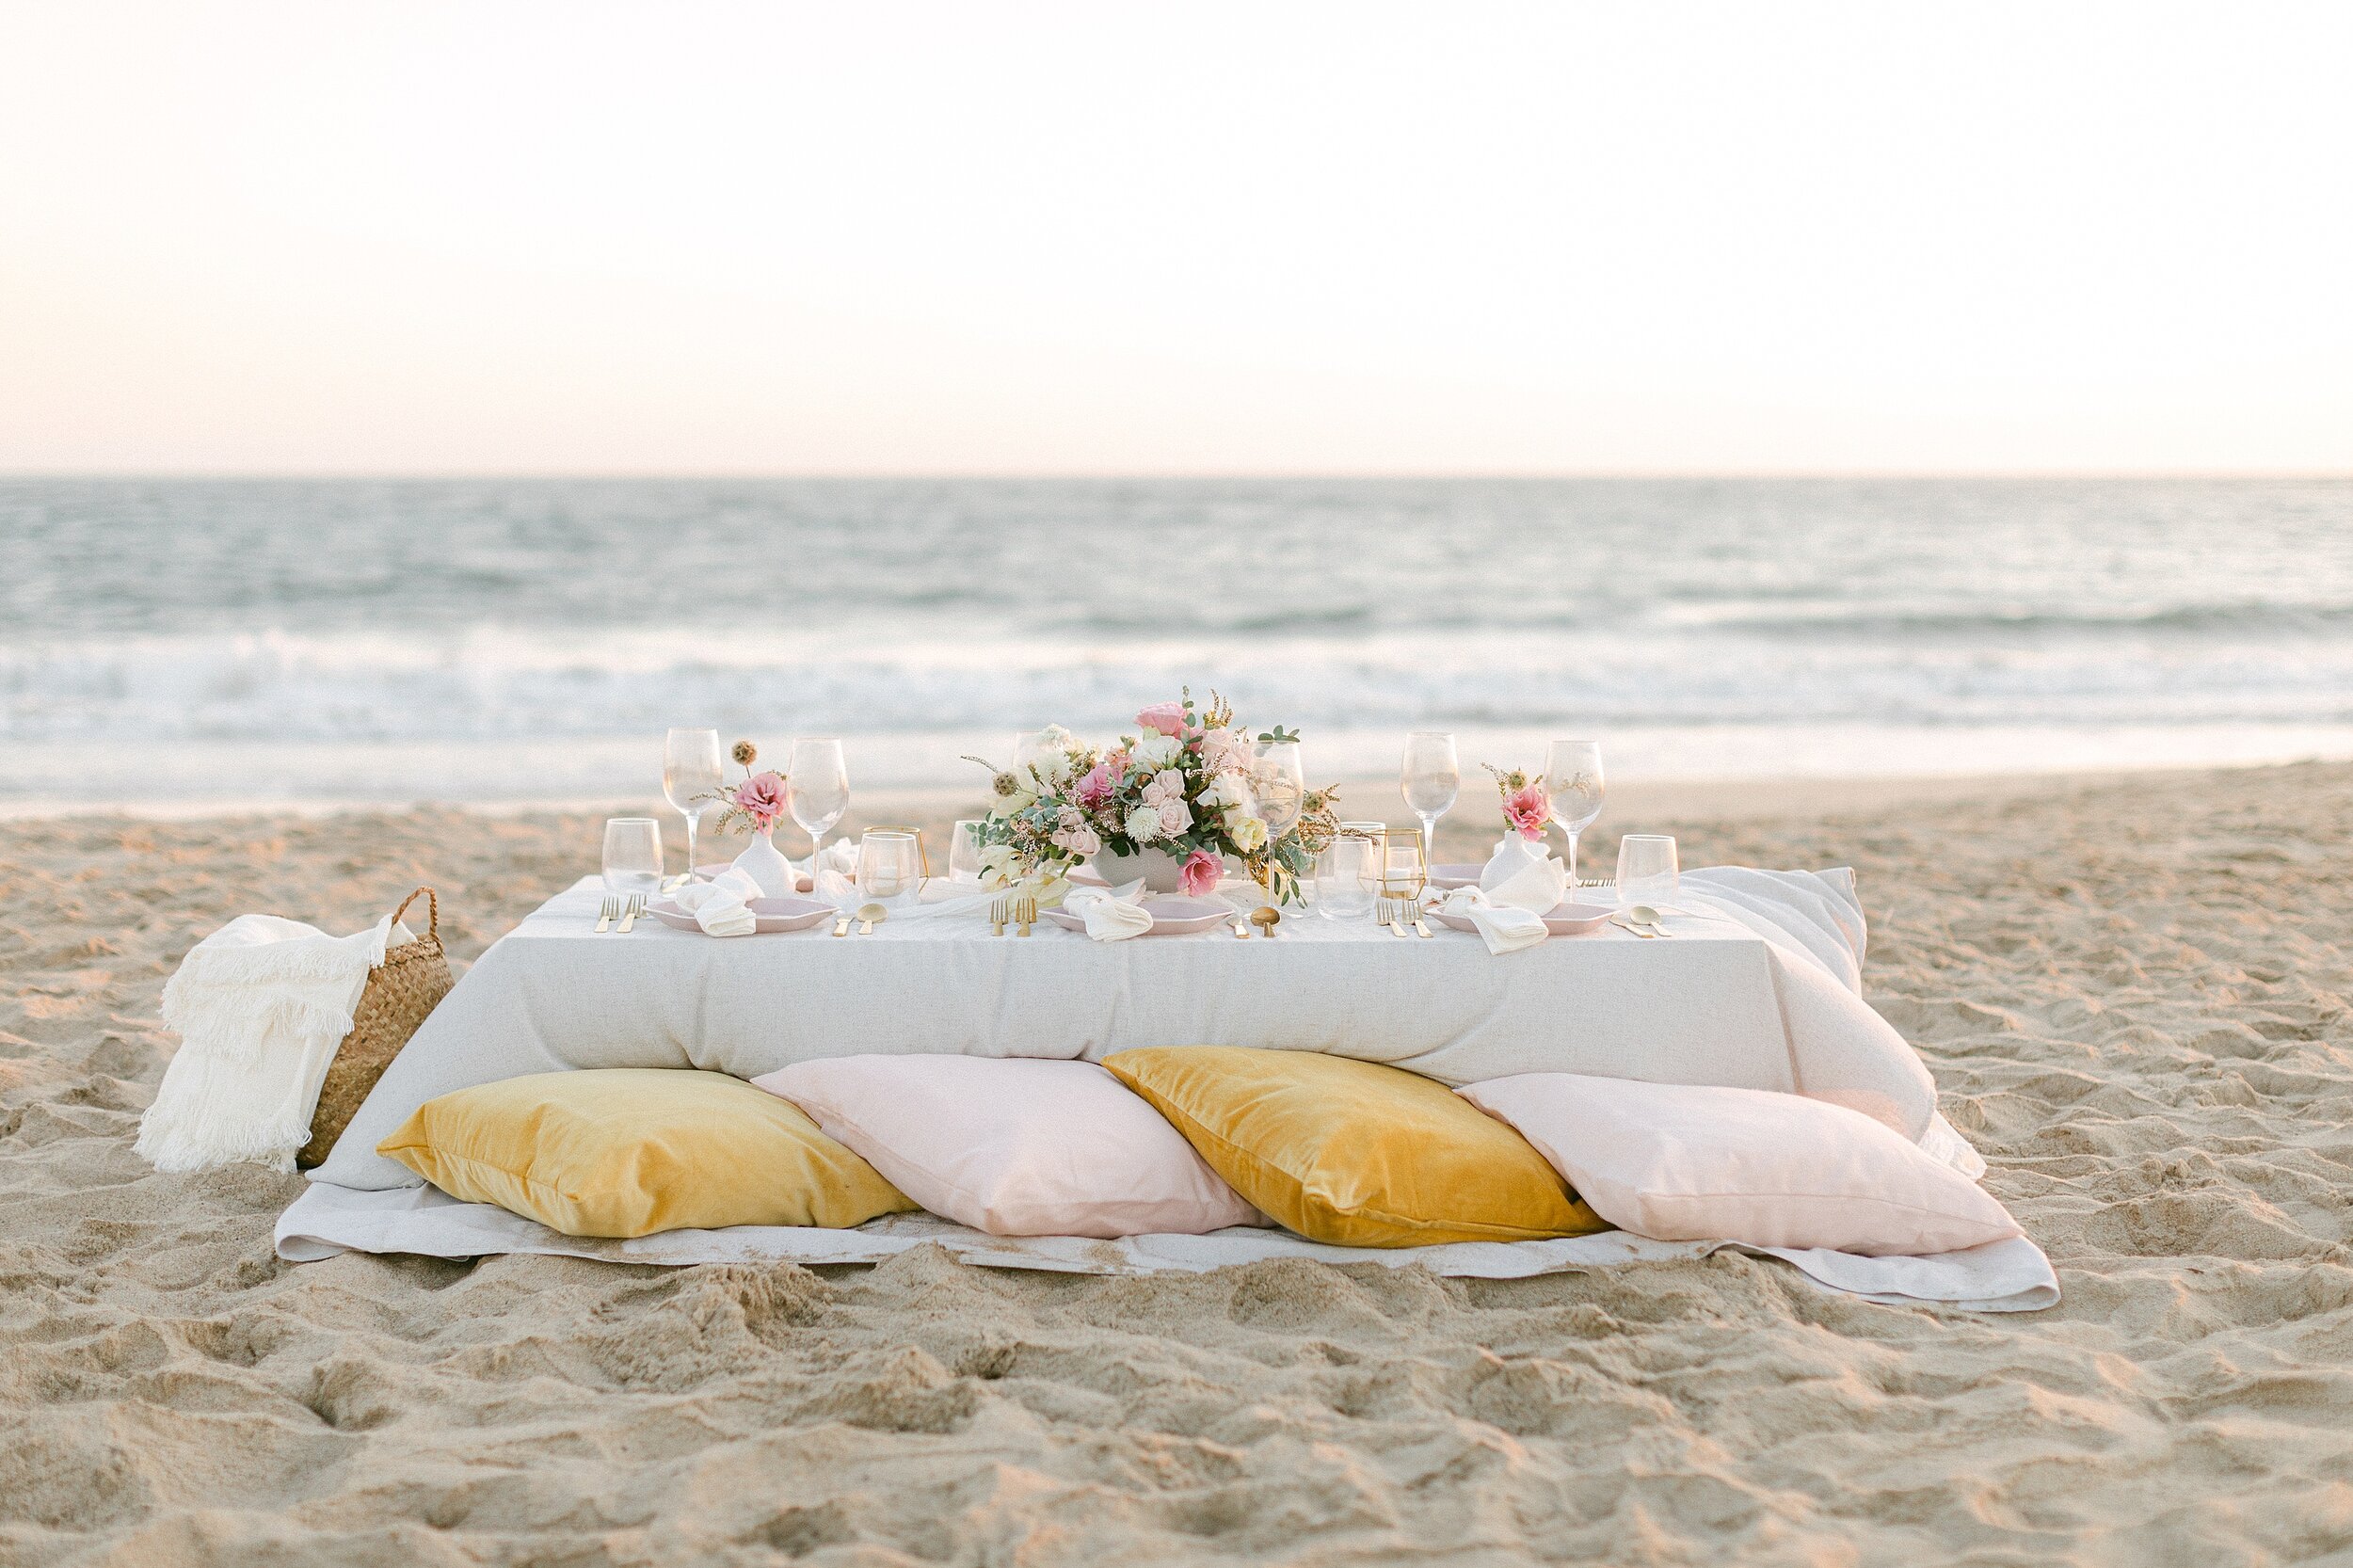 This beachside reception features a low table with a cream-colored linen table cloth, pink and white floral centerpiece, blush plates, gold flatware, and mustard yellow and blush pillow for seating.